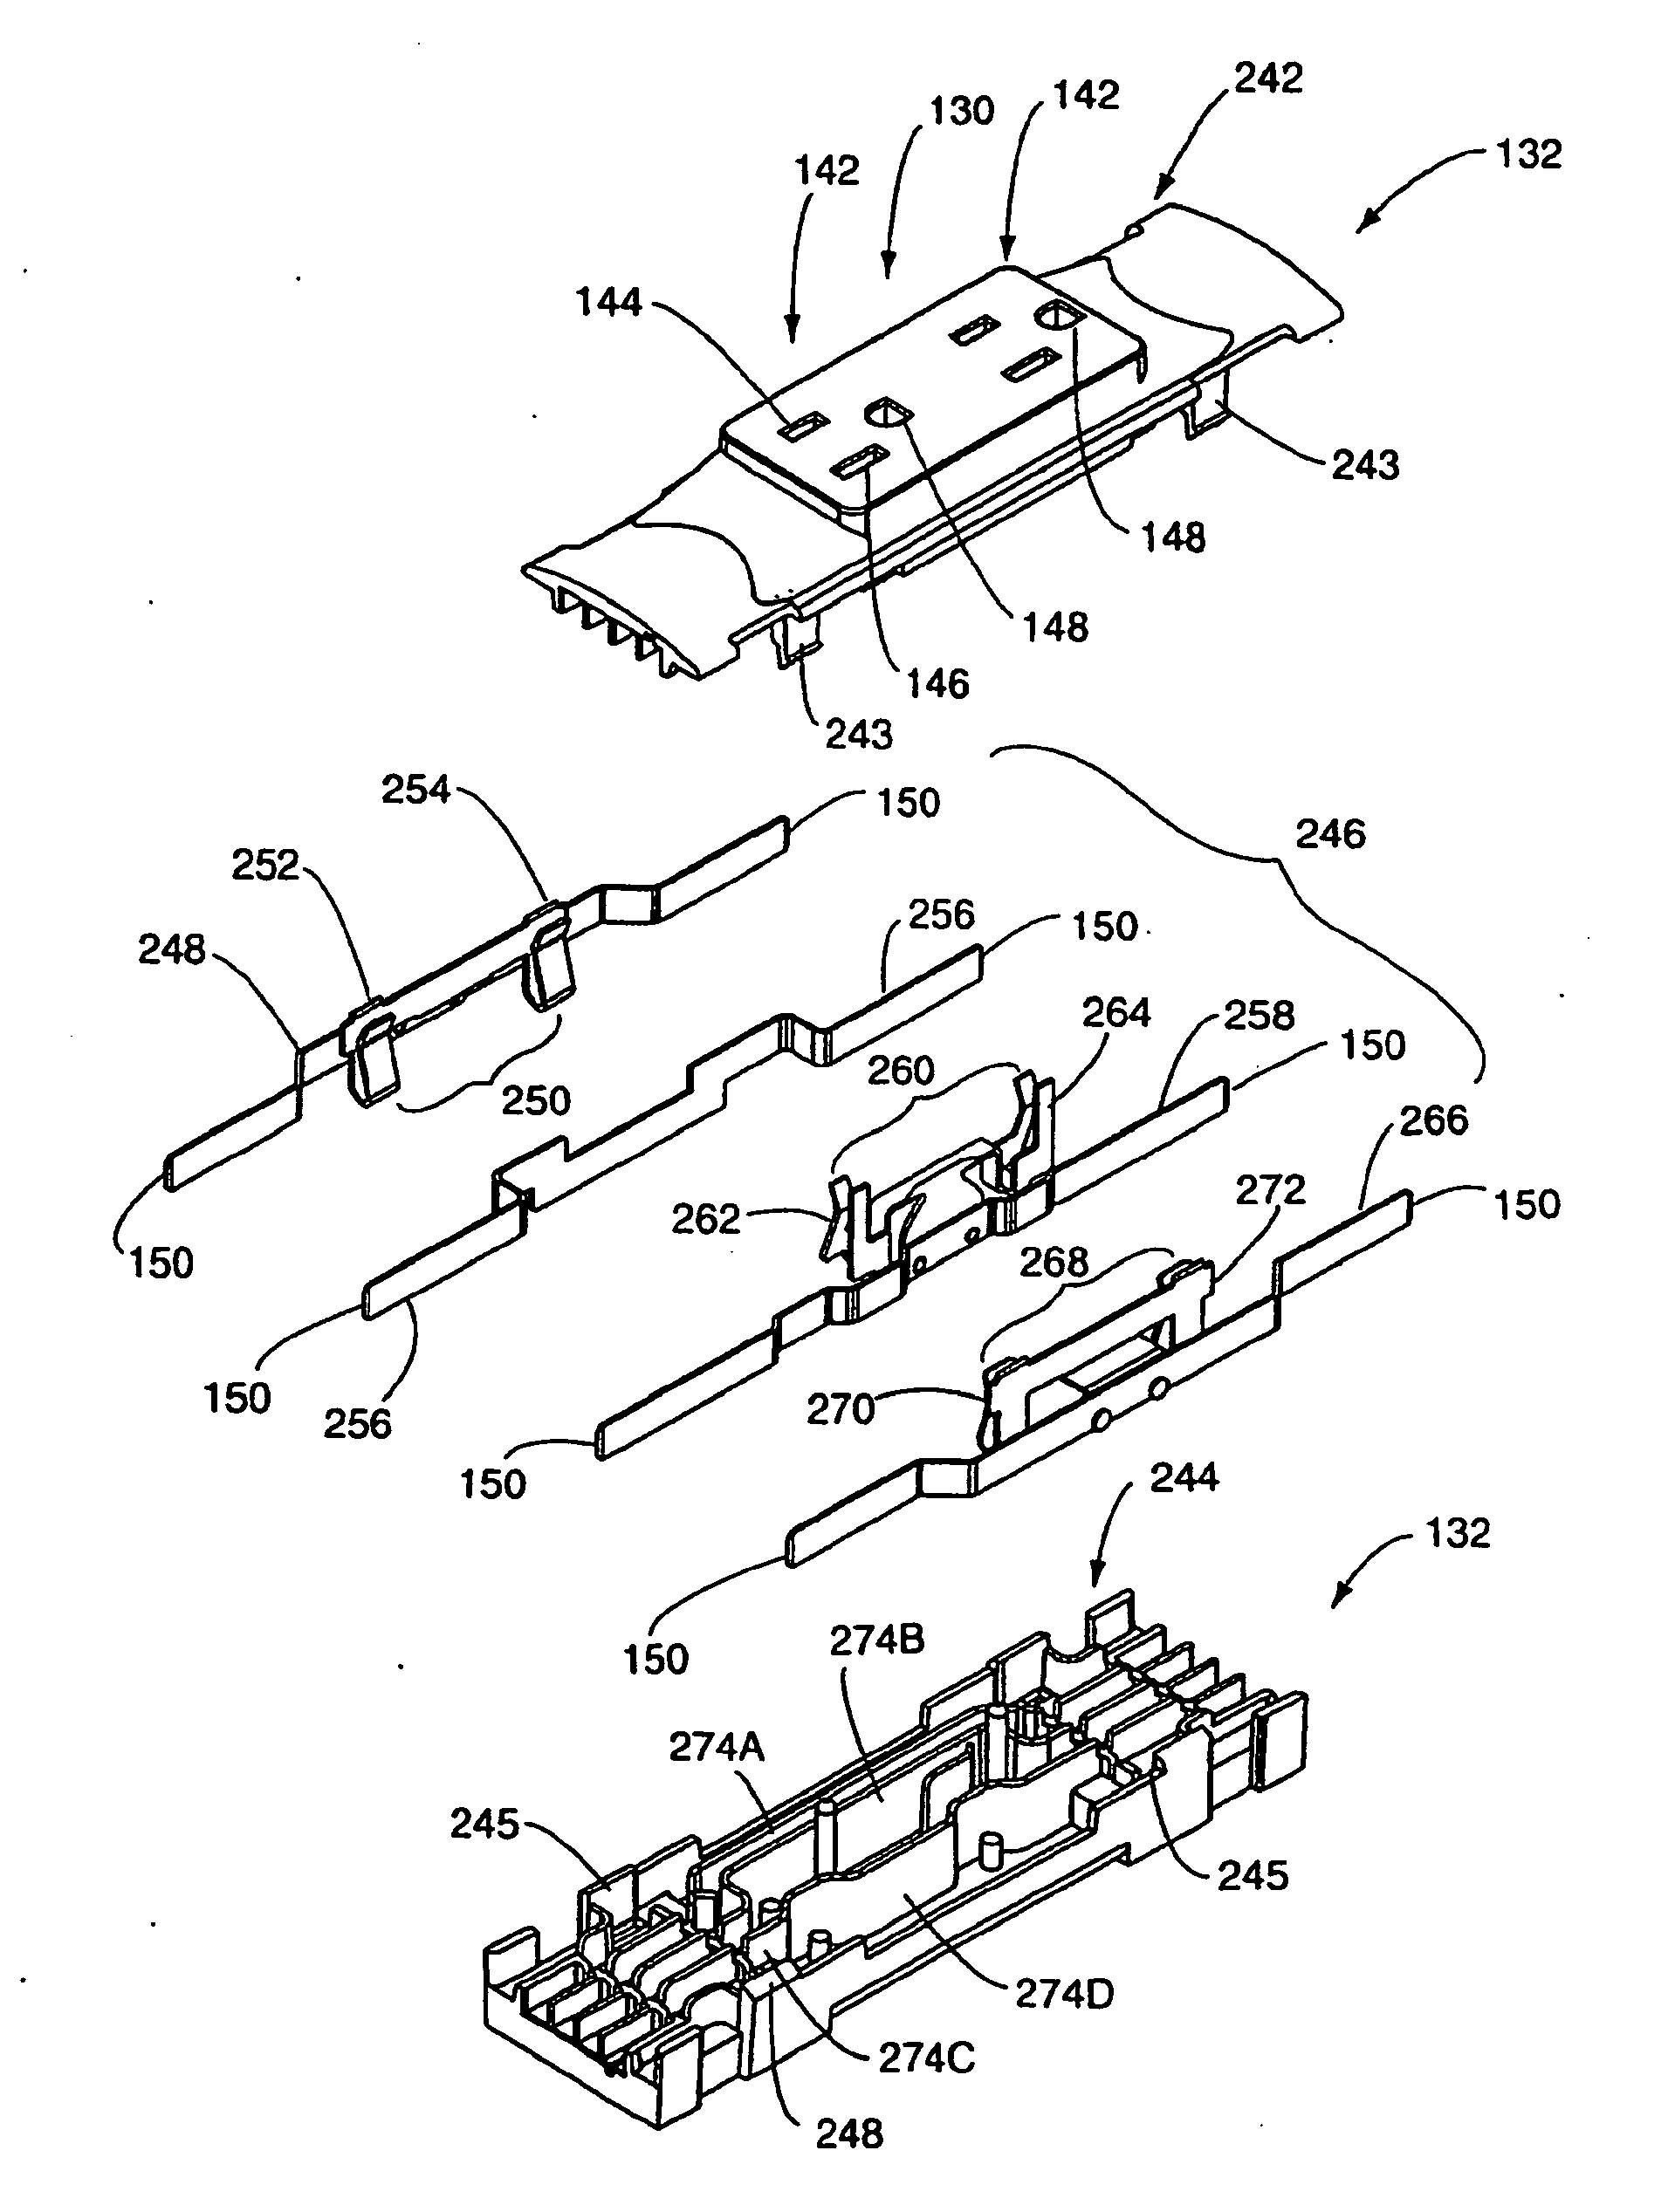 Modular electrical system including back-to-back receptacle configurations and capable of providing four wire circuitry